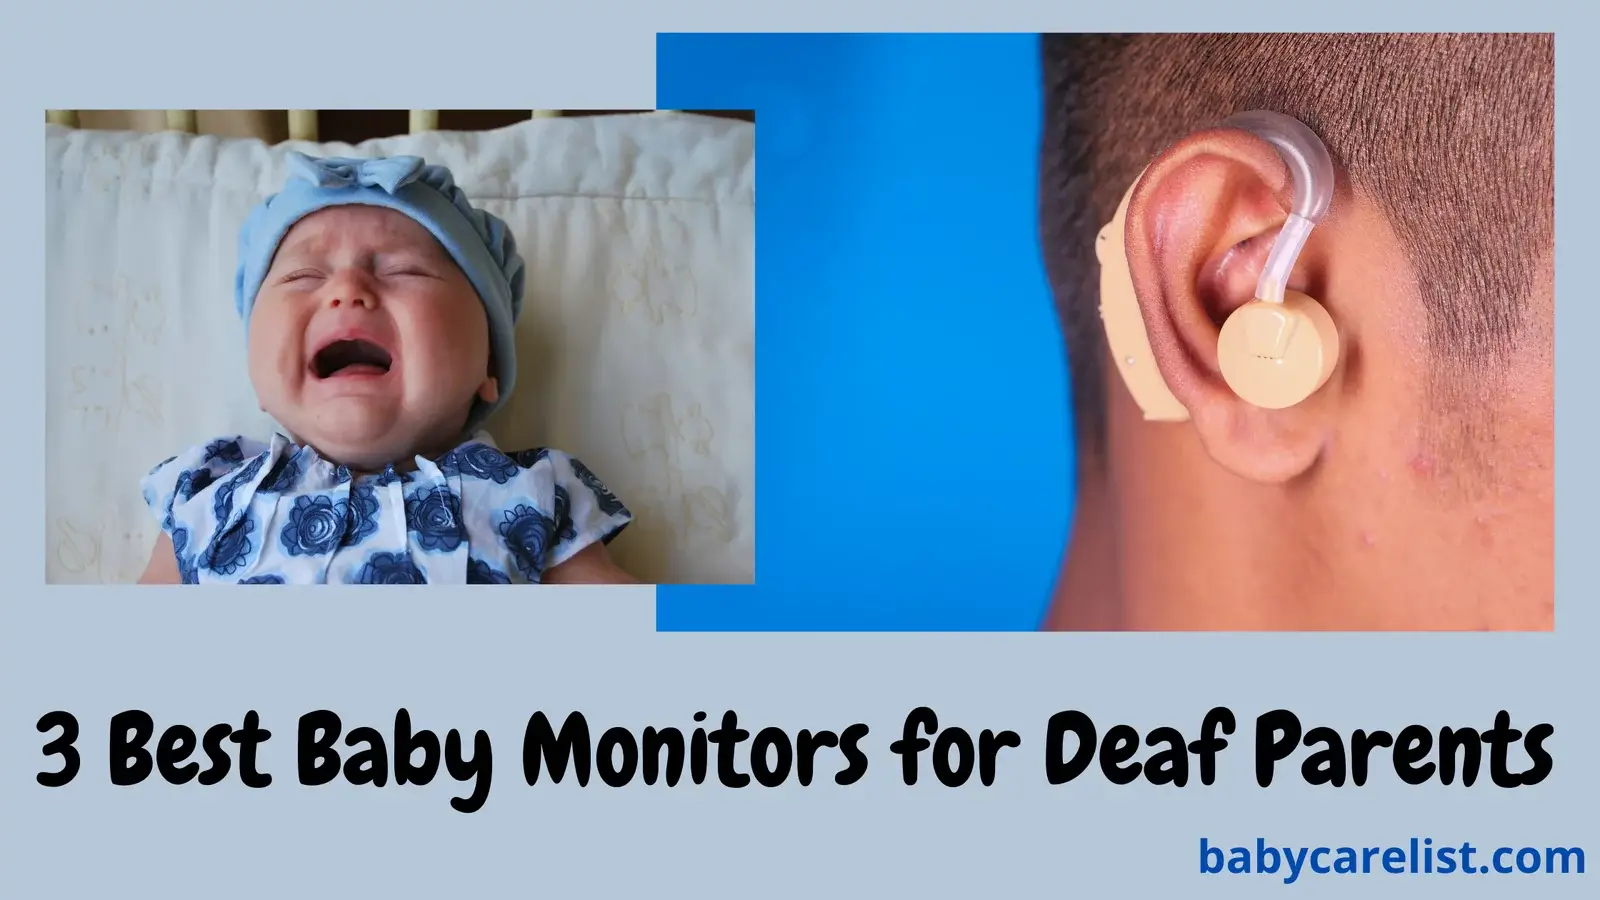 BABY MONITOR REVIEW IMAGES 2 1